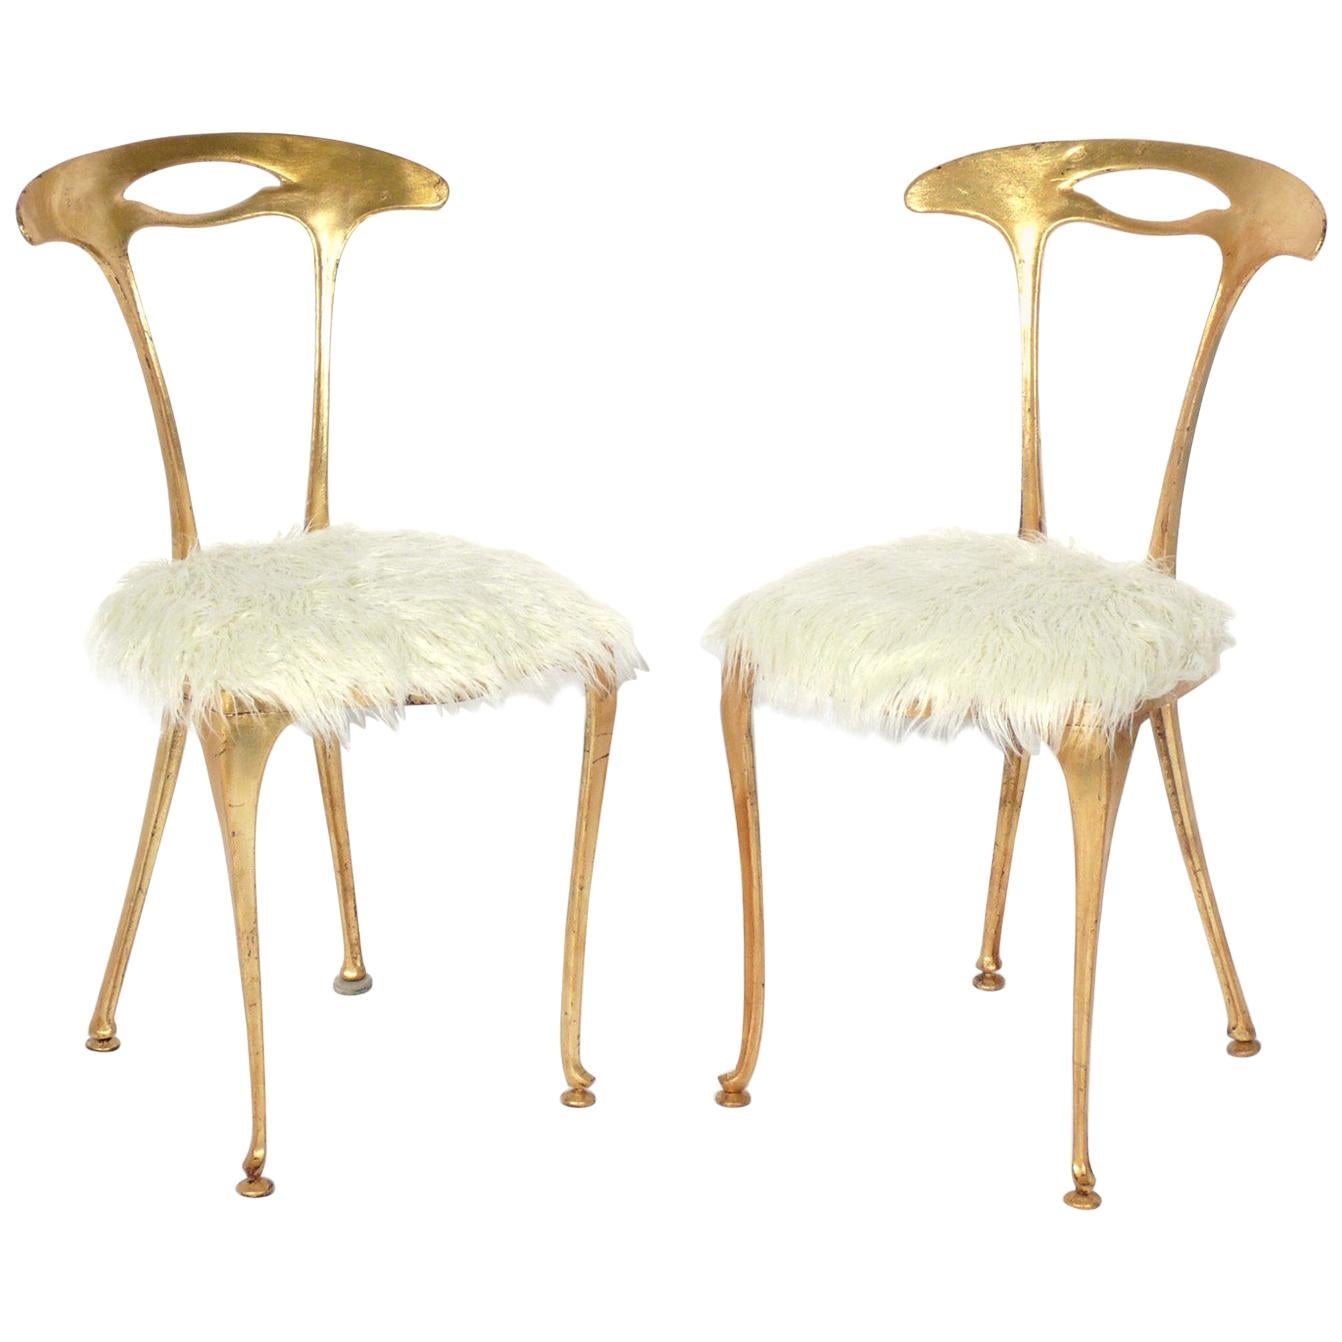 Pair of Gilt and Faux Lamb Chairs by Palladio